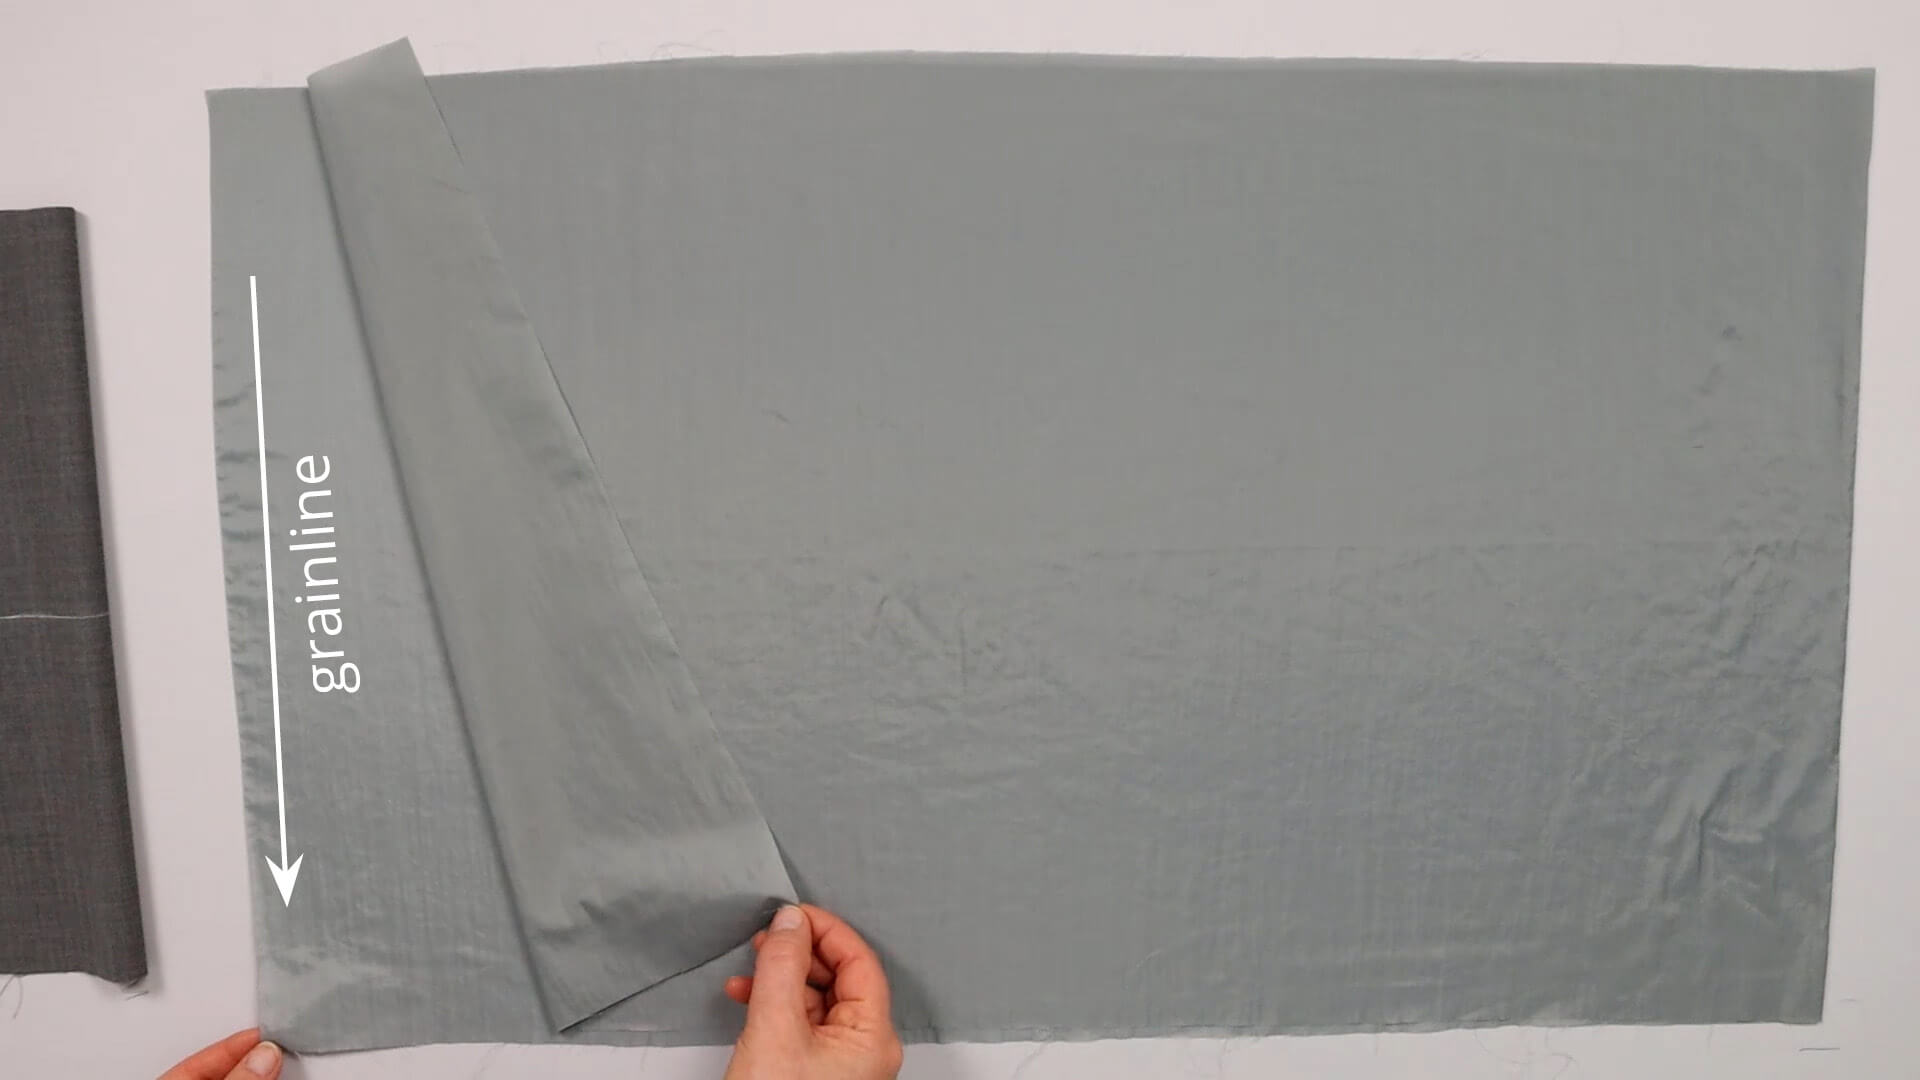 The picture shows the lining fabric